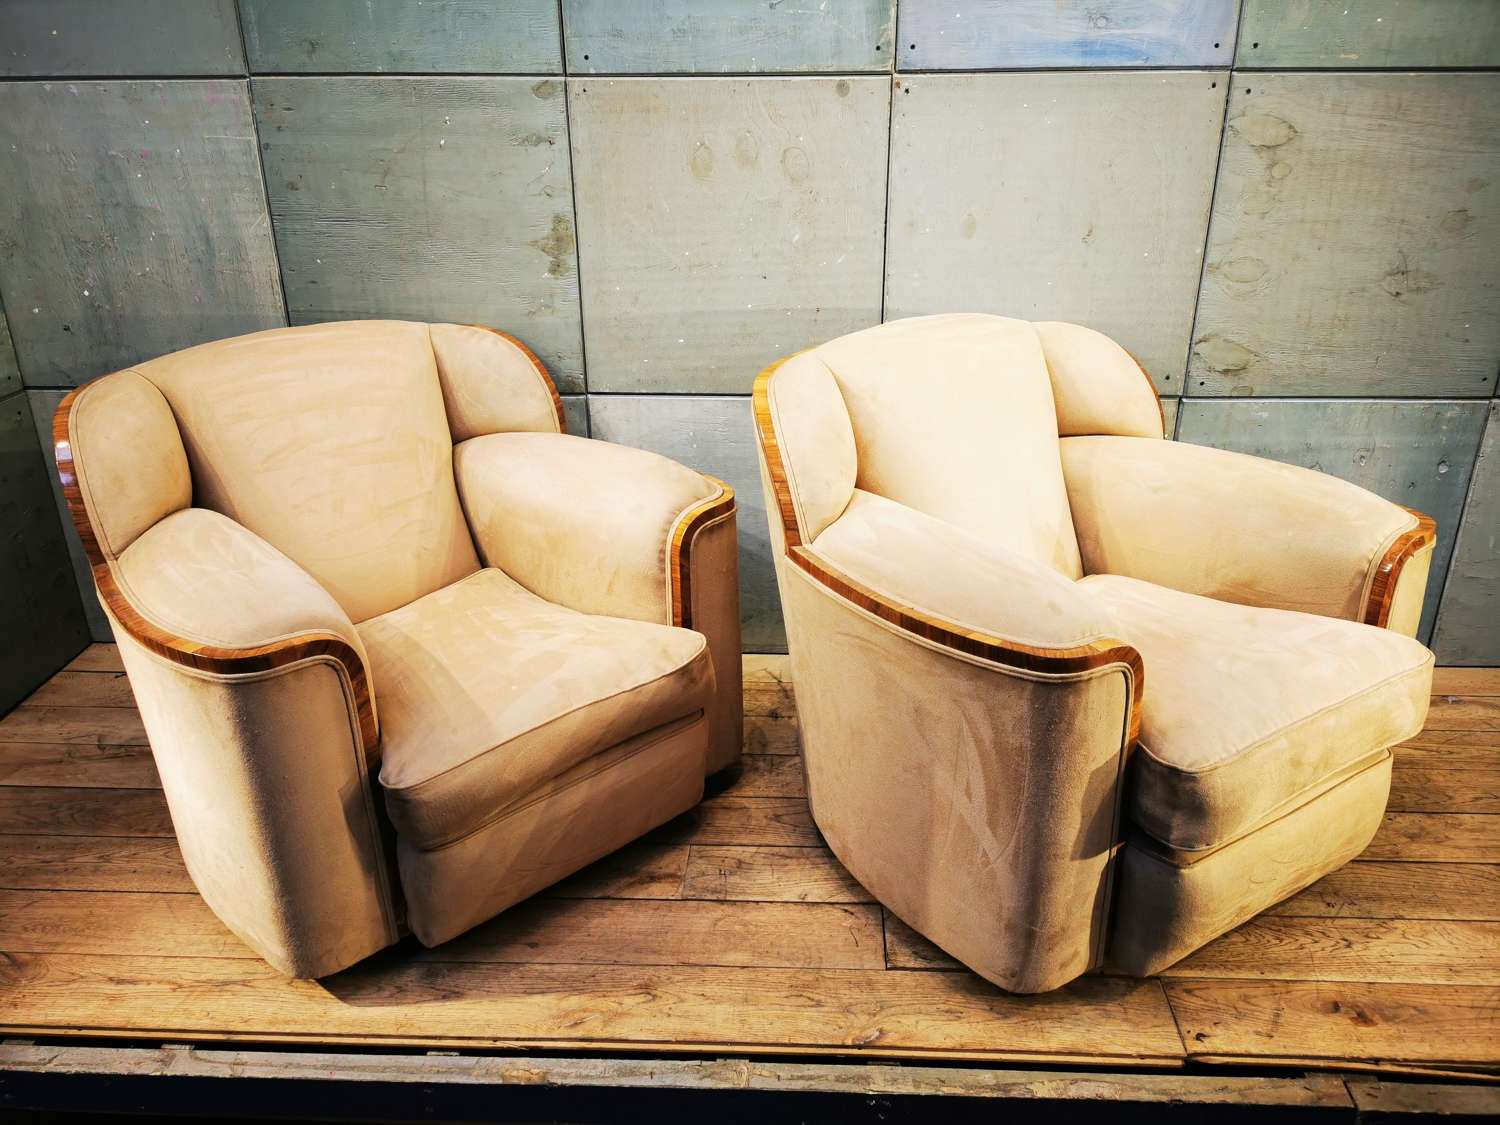 A really good pair of art deco chairs